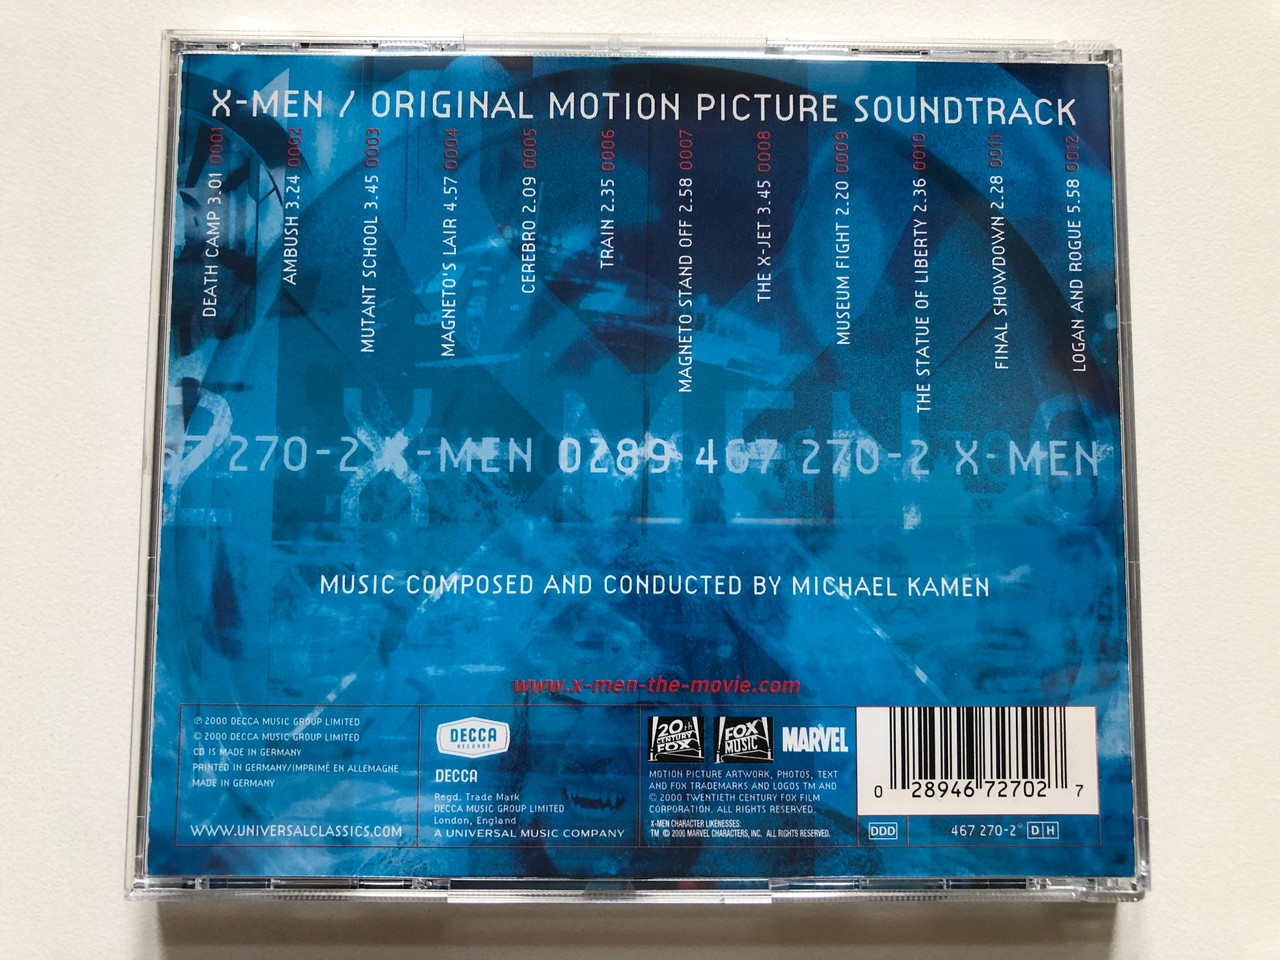 https://cdn10.bigcommerce.com/s-62bdpkt7pb/products/0/images/313267/X-Men_Original_Motion_Picture_Soundtrack_-_Music_Composed_And_Conducted_By_Michael_K-Men_Decca_Audio_CD_2000_467_270-2_2__80720.1700646772.1280.1280.JPG?c=2